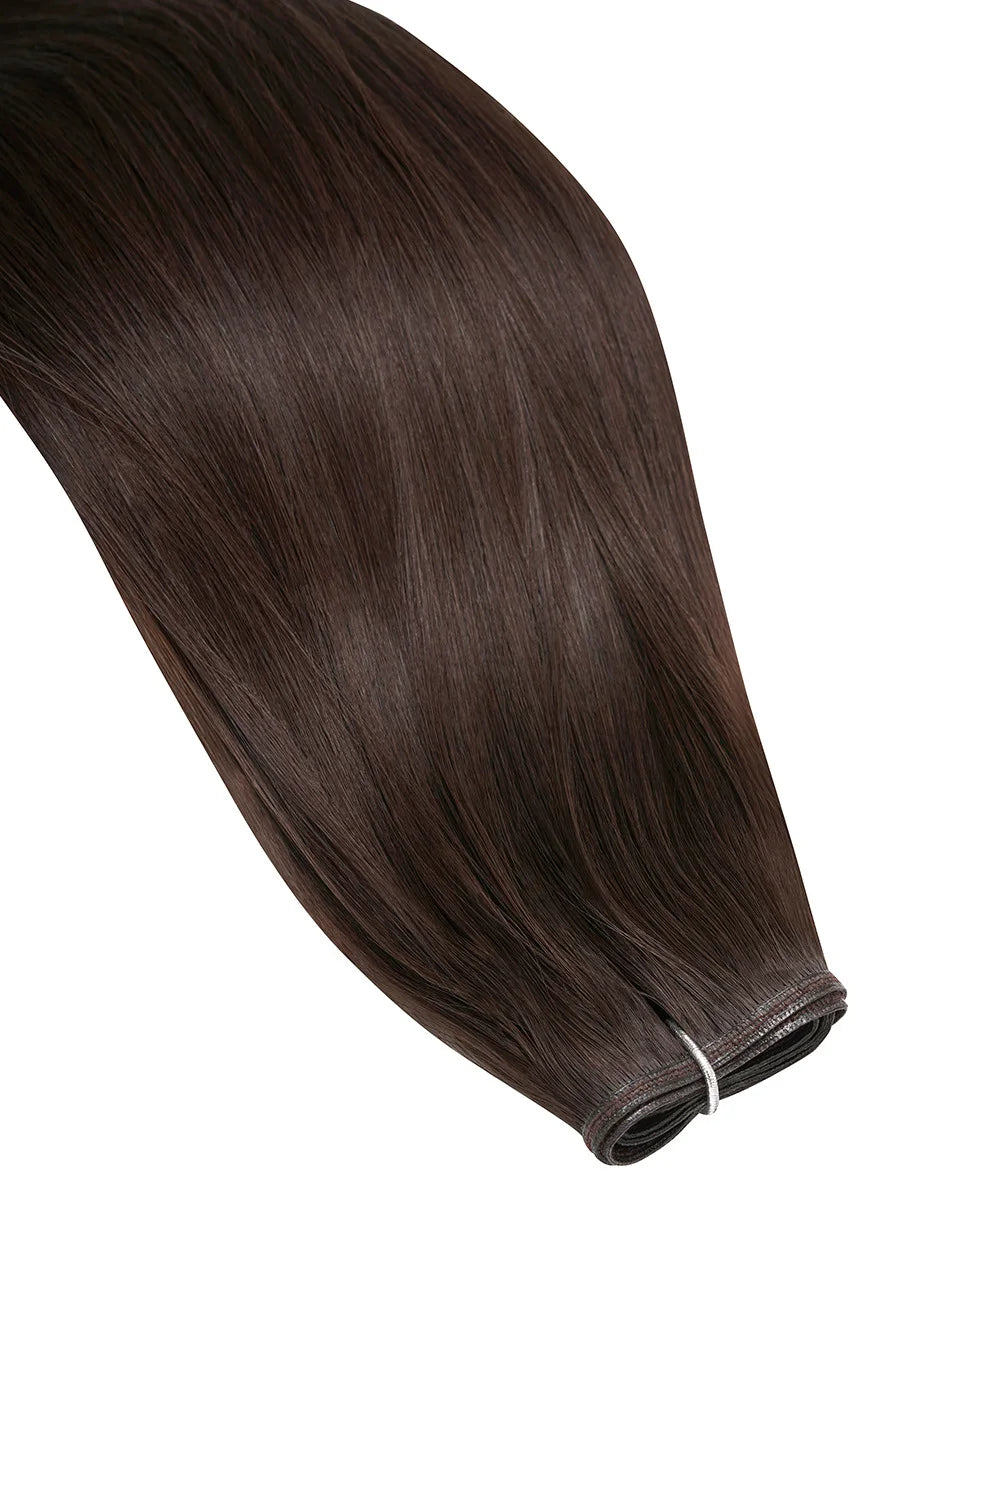 dark brown #3 remy royale flat weft cropped